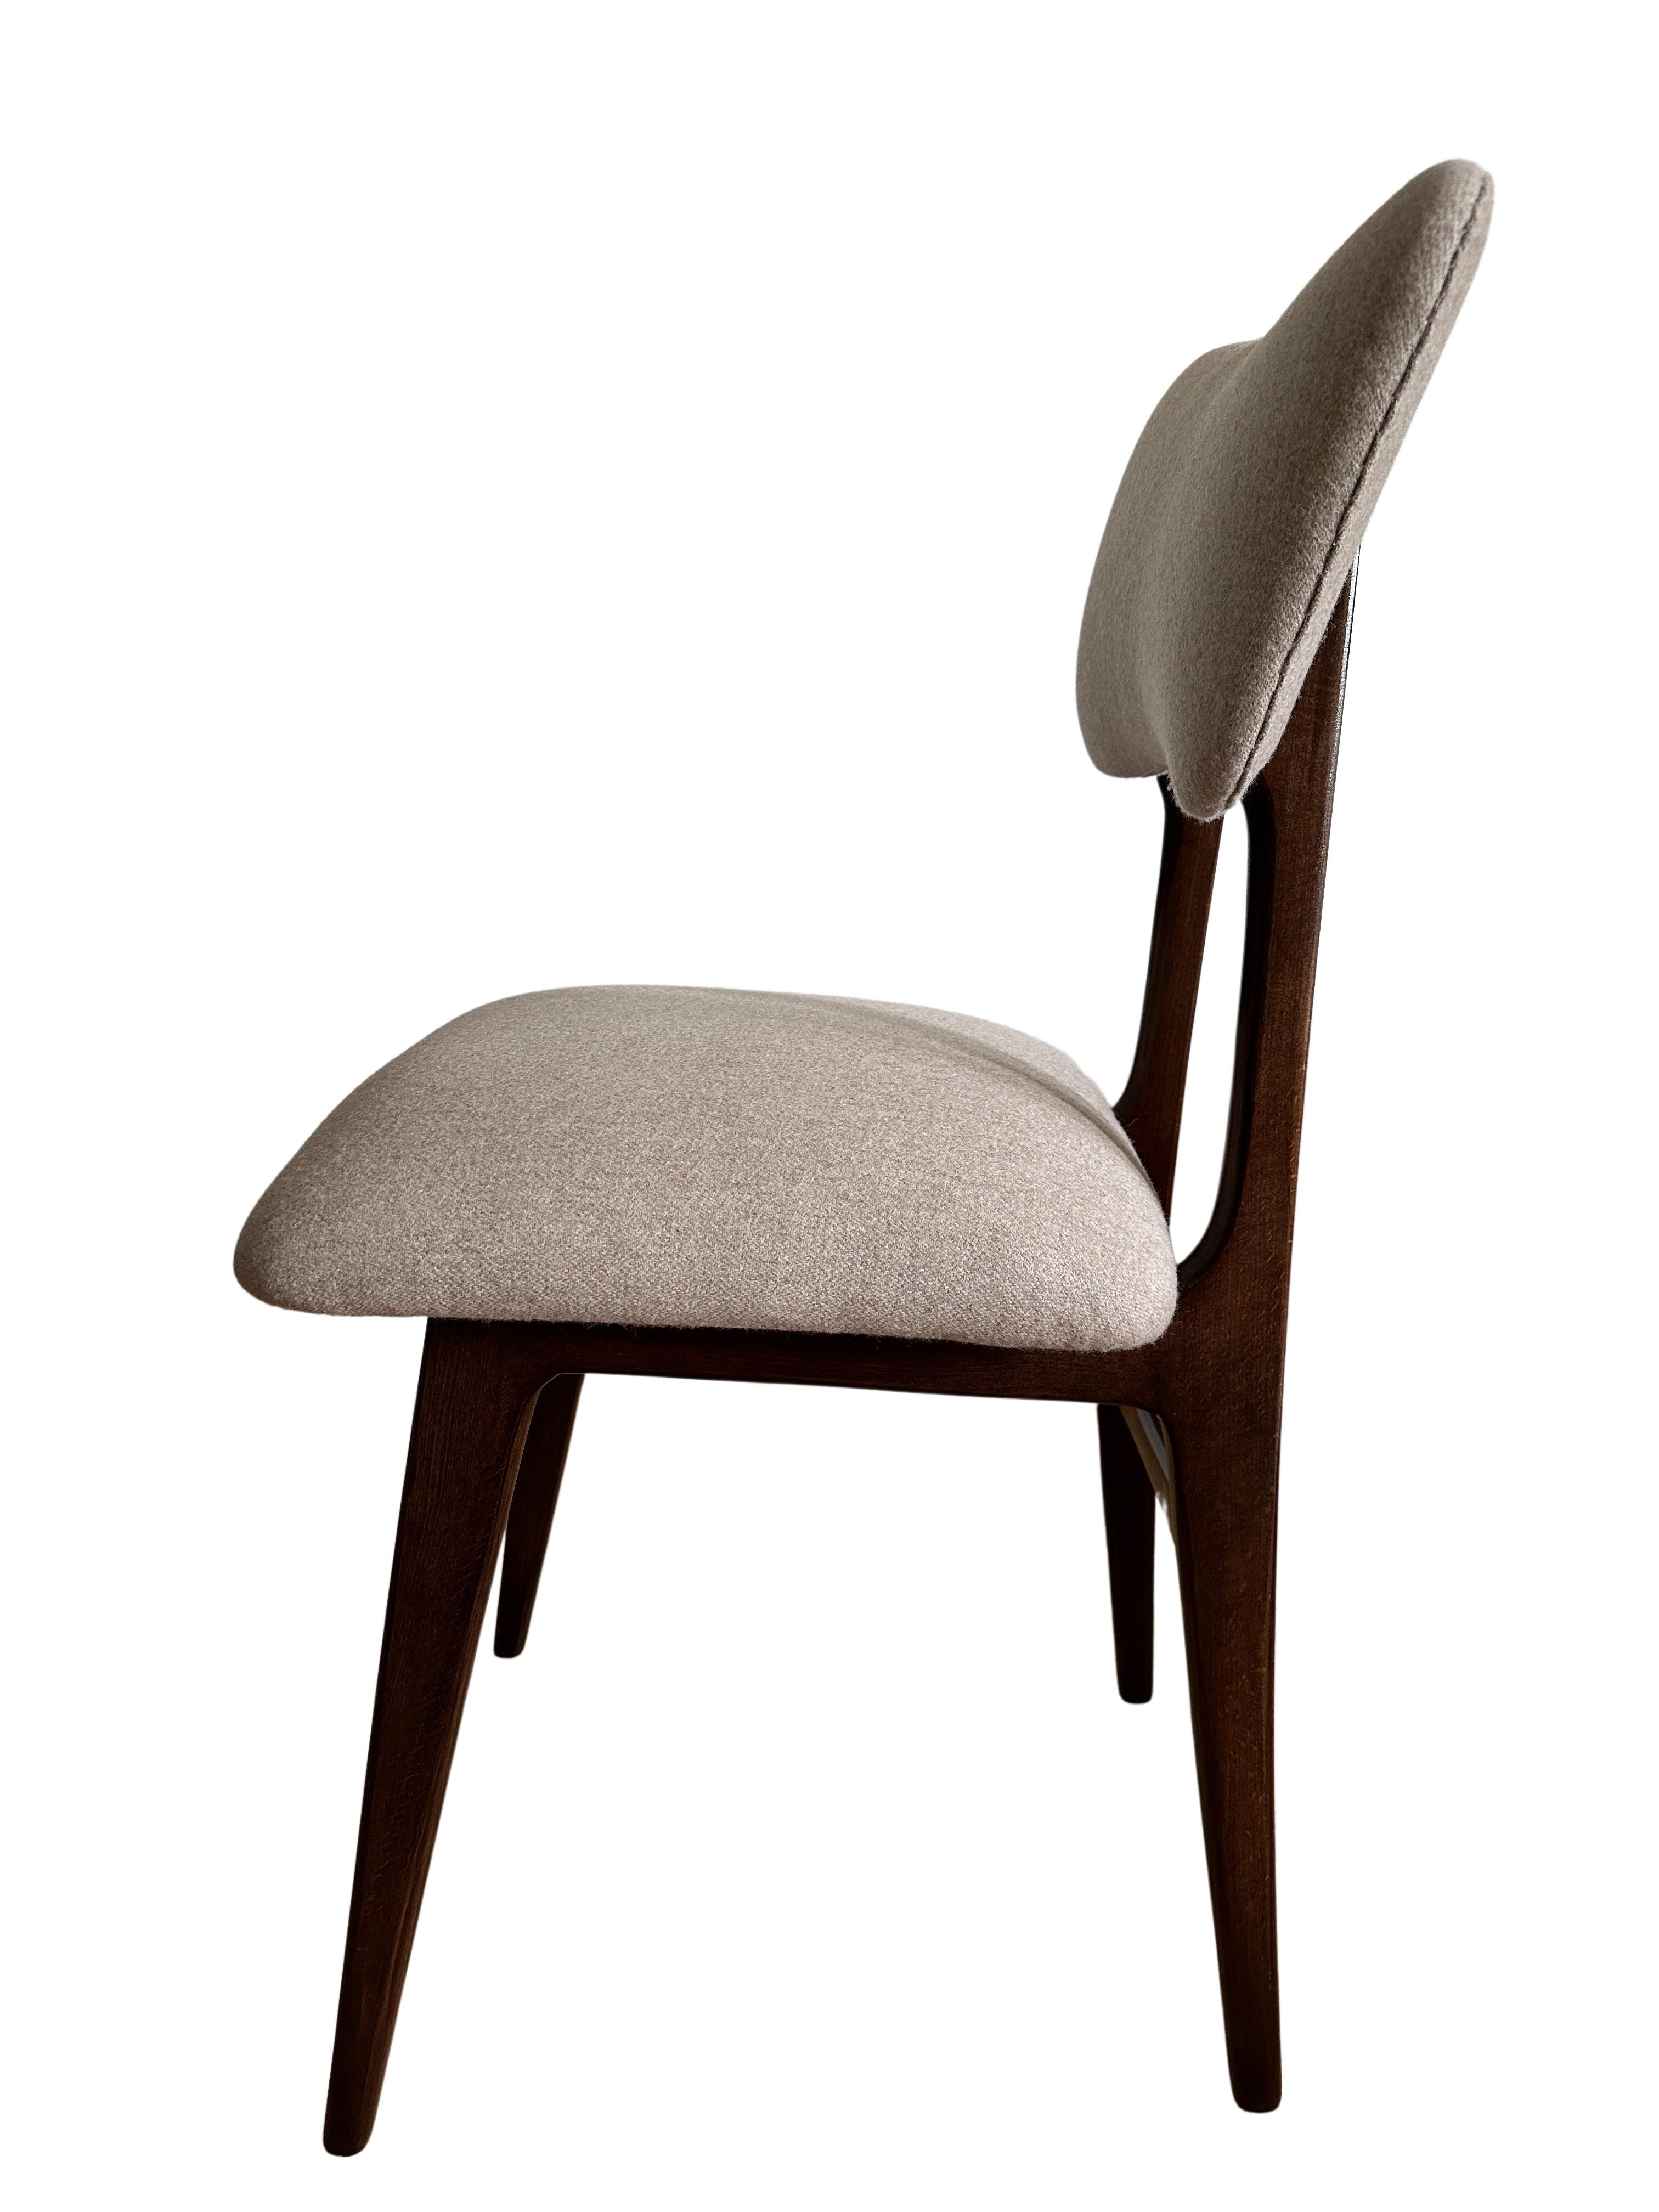 Set of 4 Midcentury Dining Chairs in Beige Wool Upholstery, Poland, 1960s For Sale 2